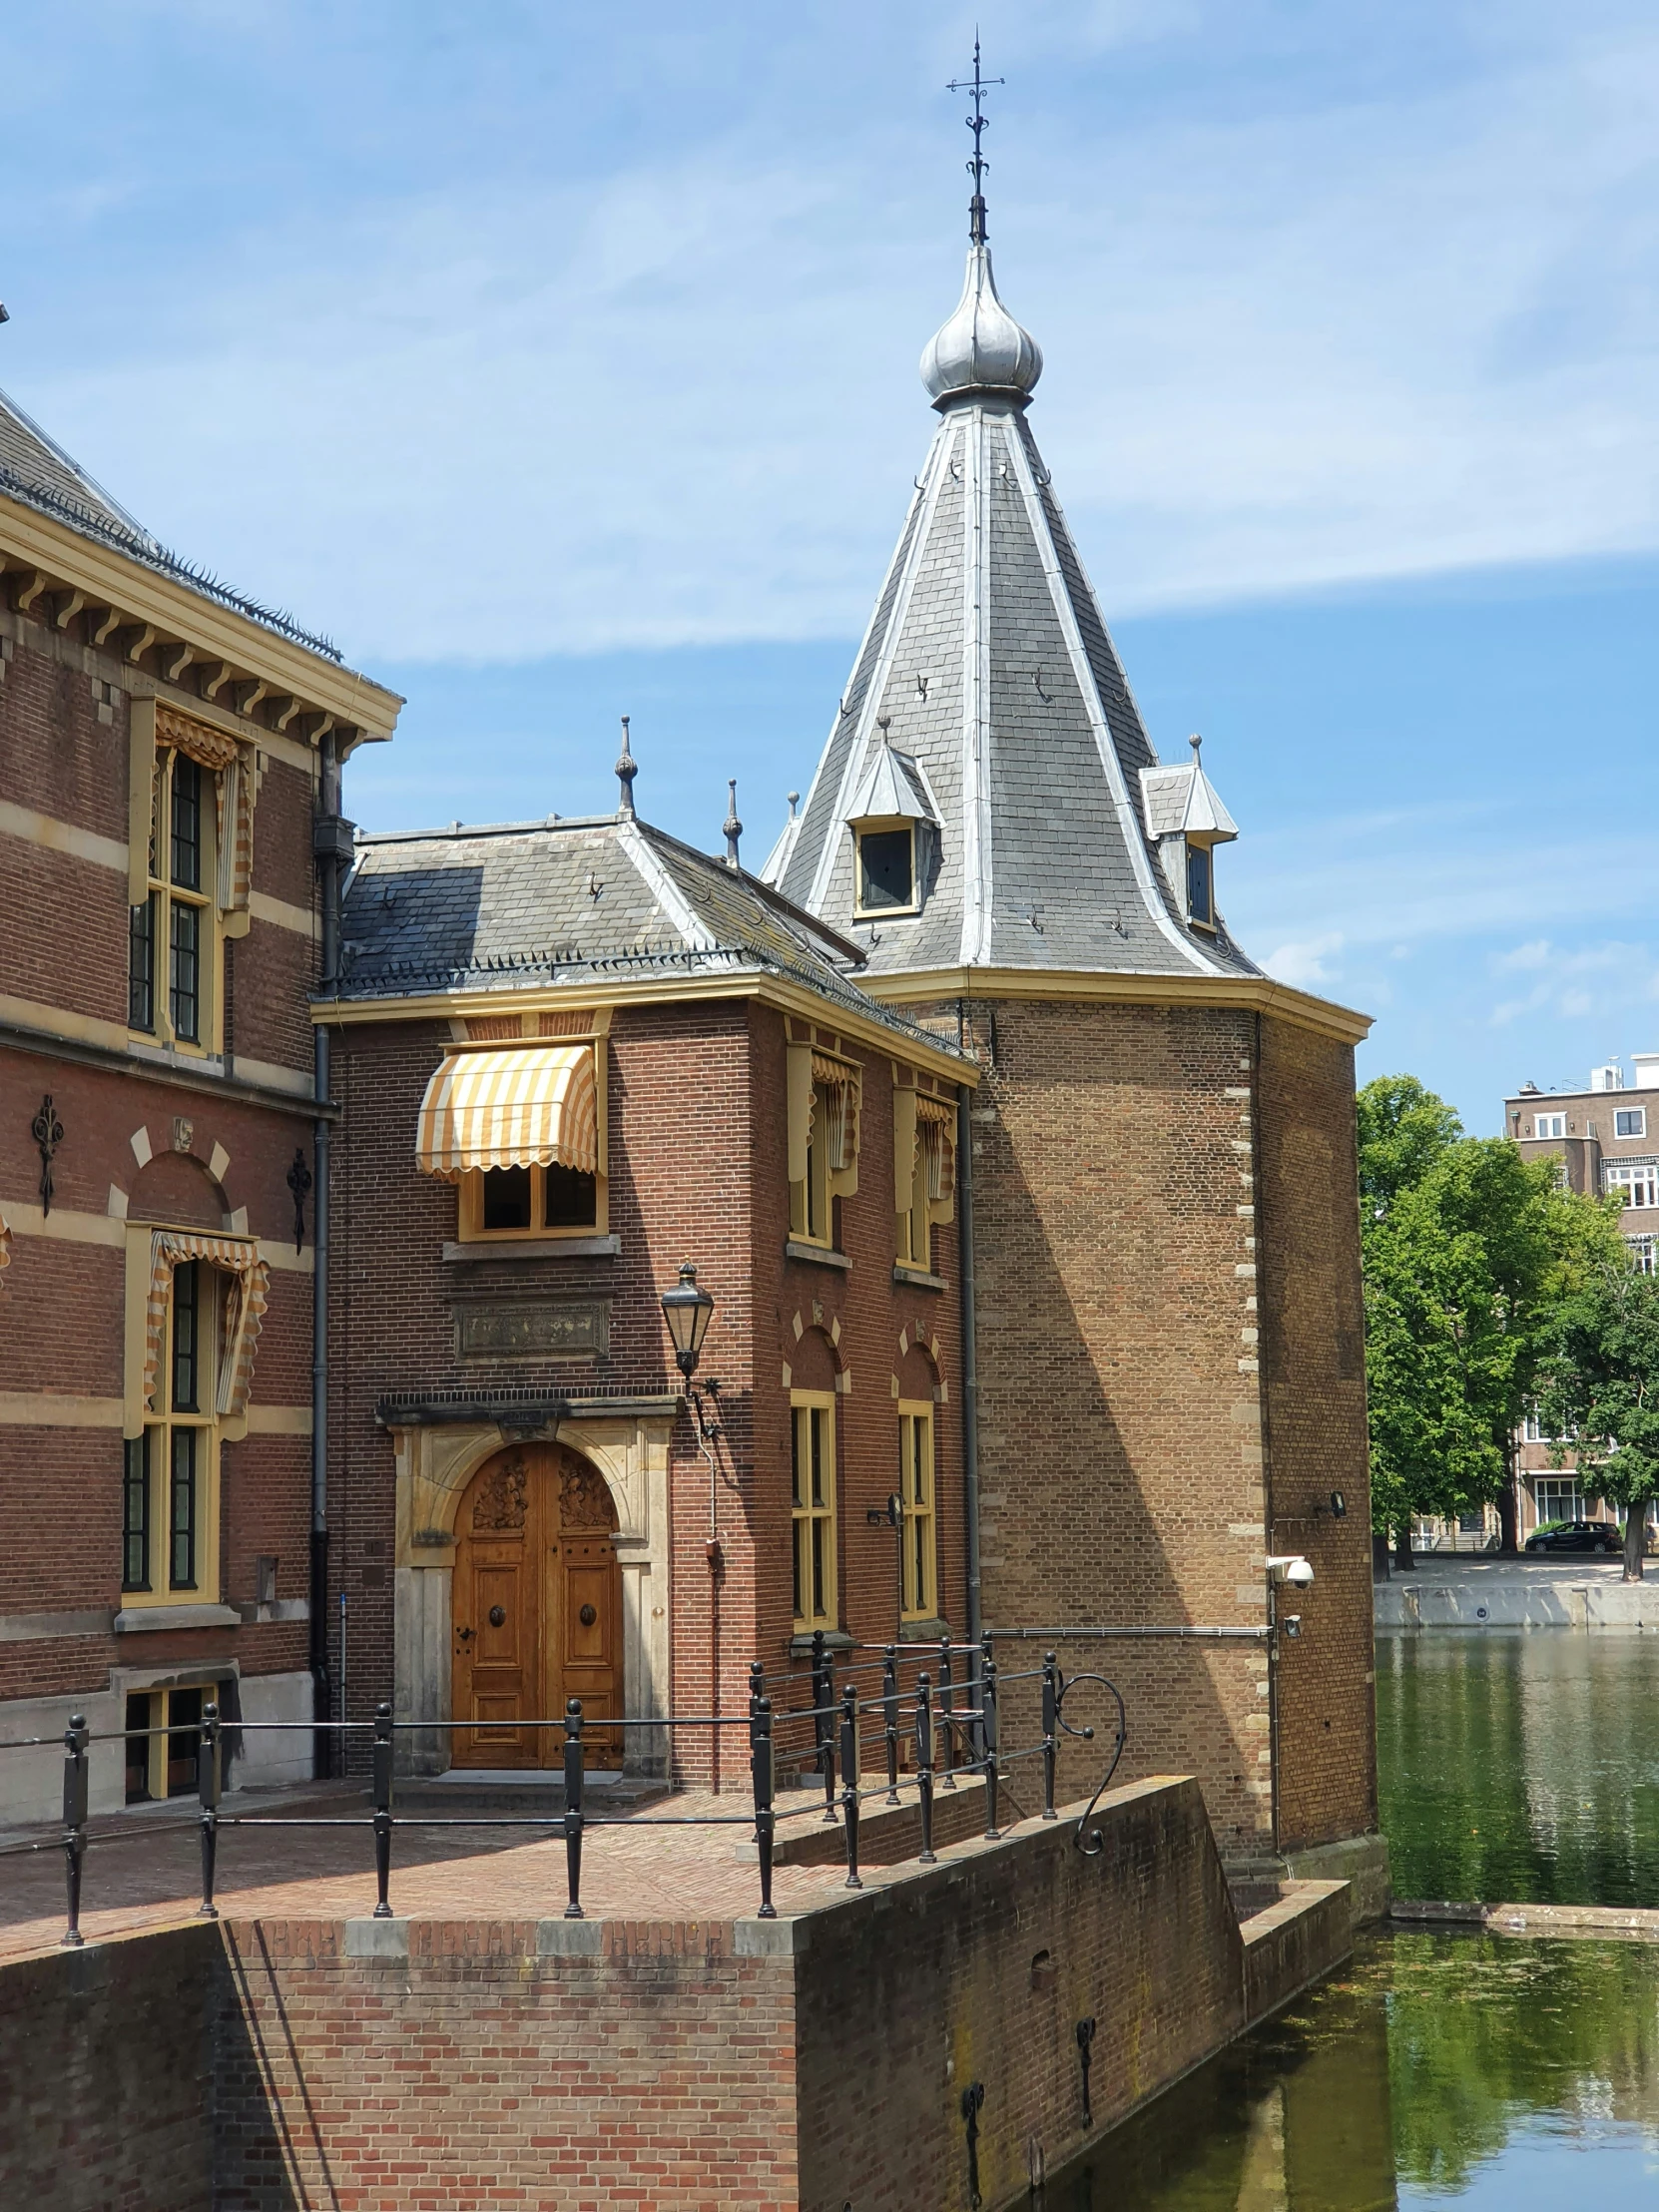 a po of a large brick building with a tower near the water